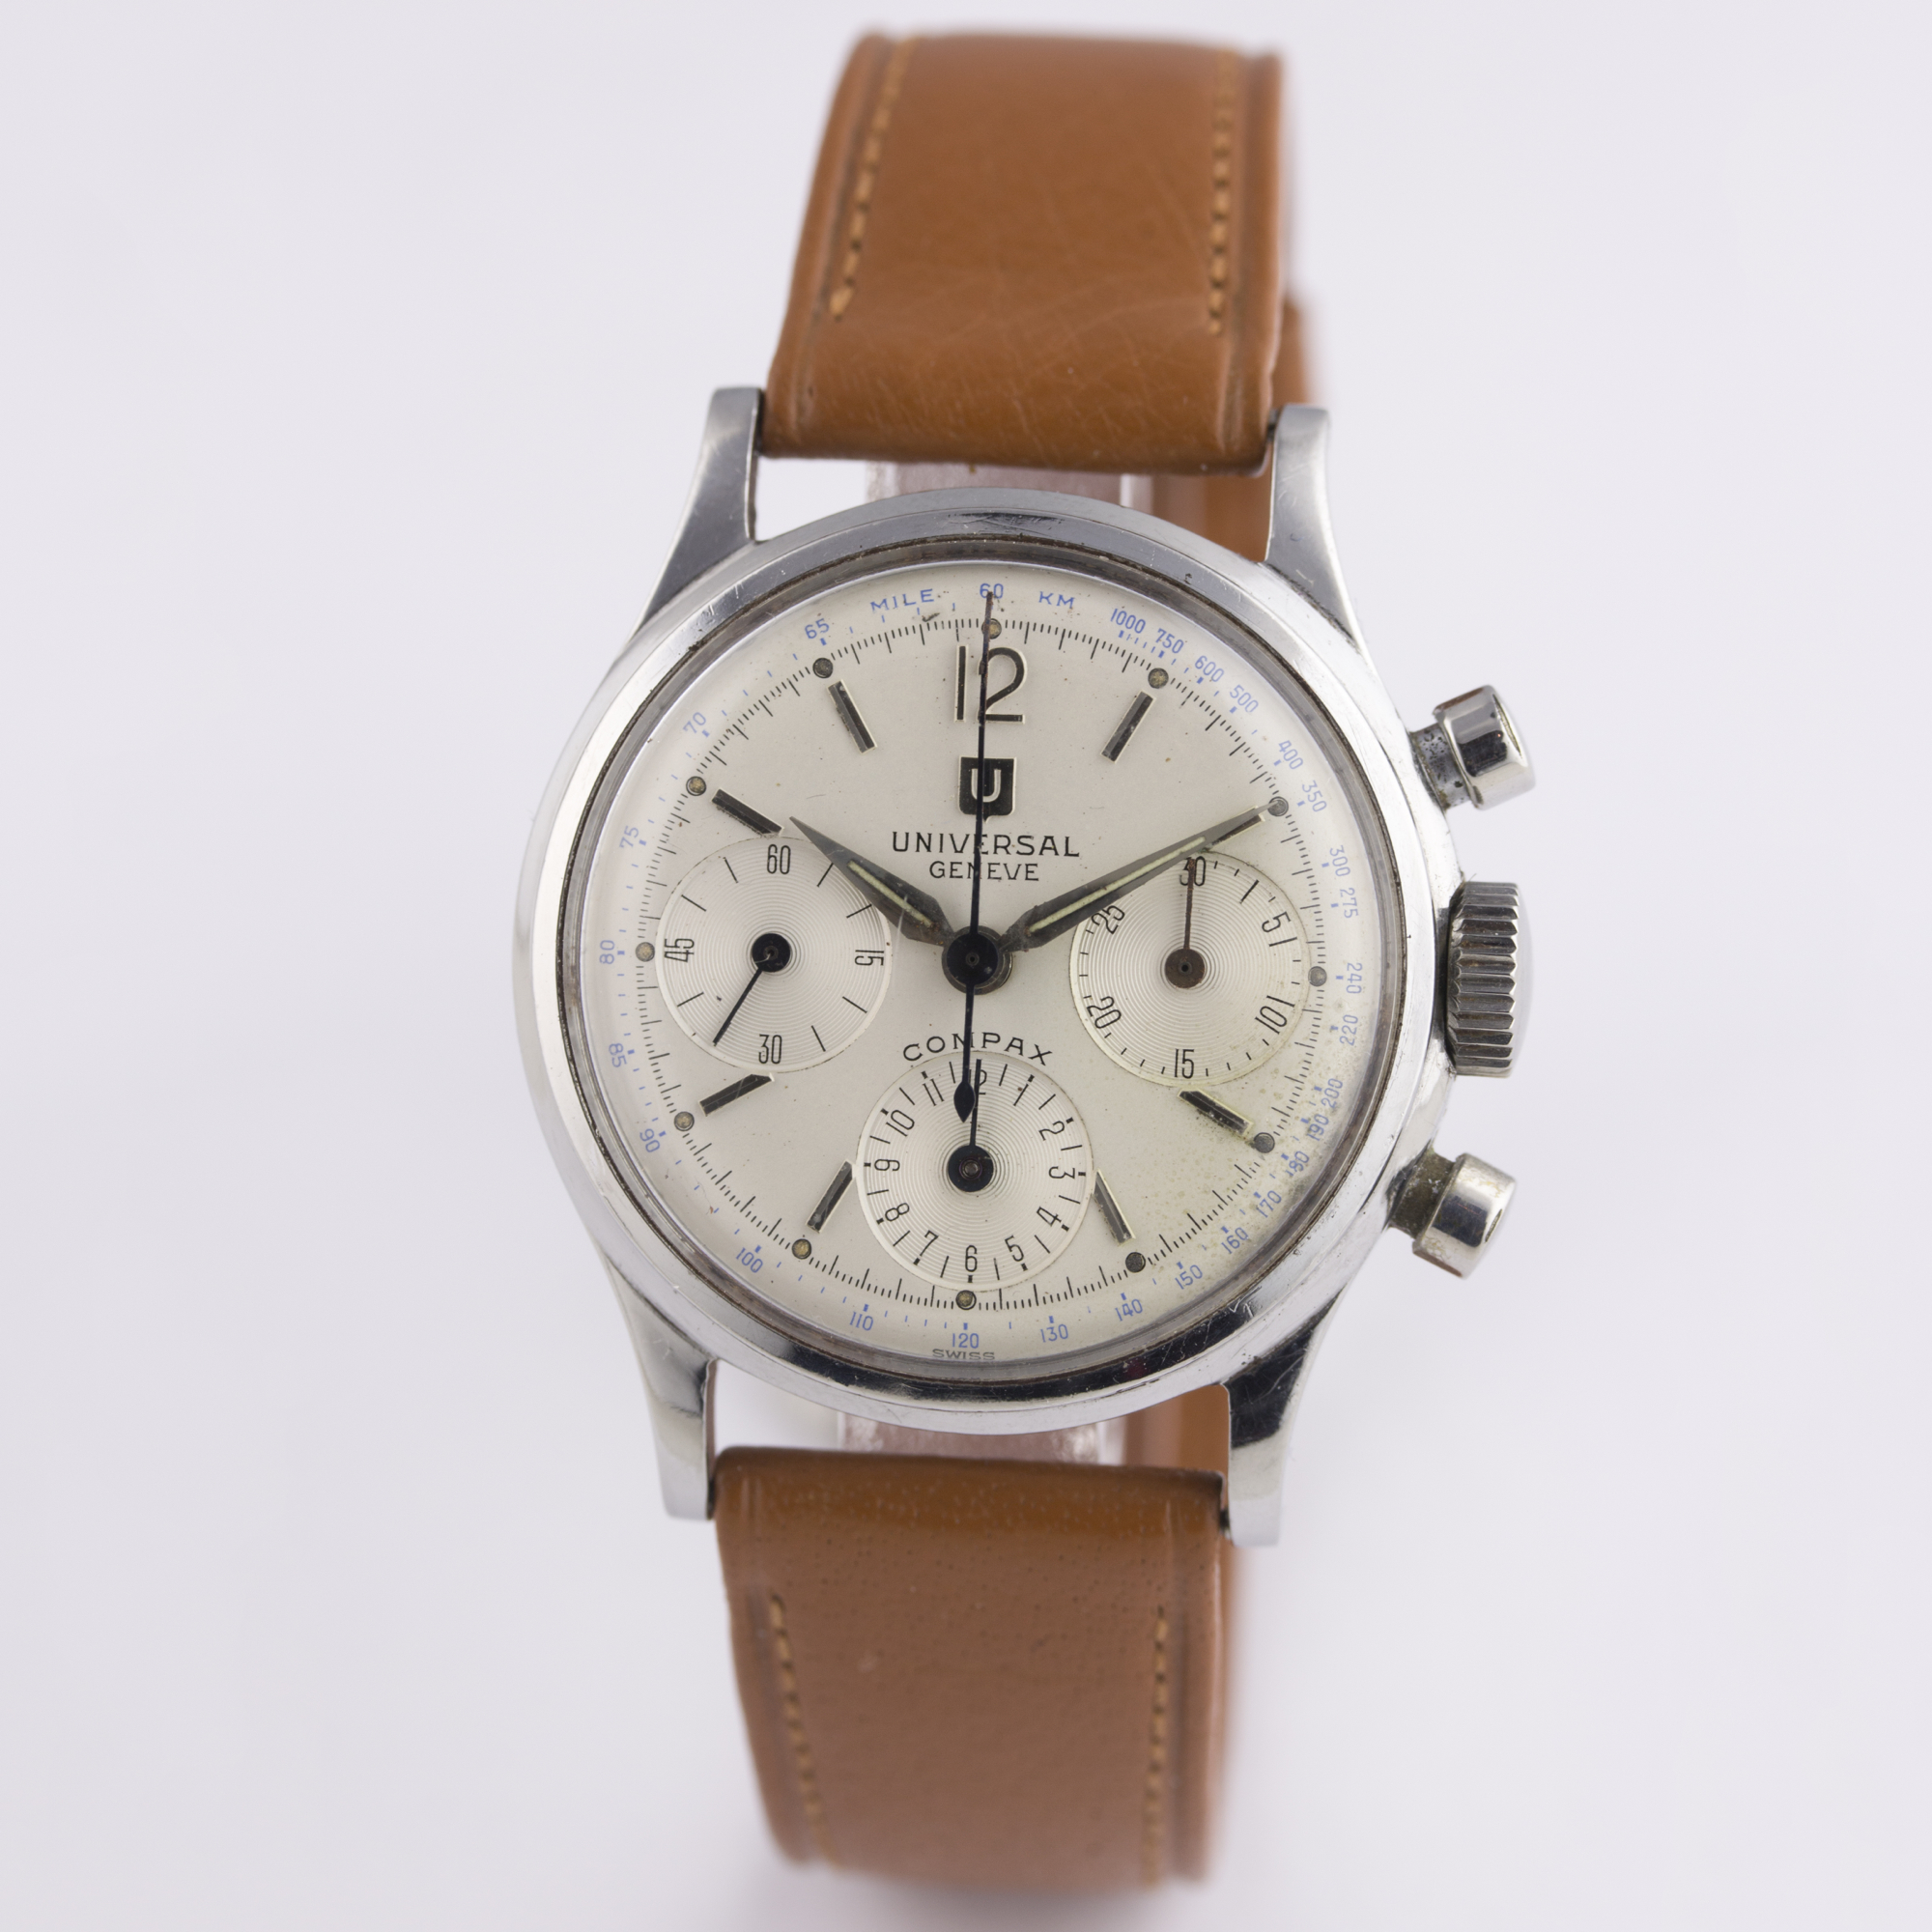 A RARE GENTLEMAN'S STAINLESS STEEL UNIVERSAL GENEVE COMPAX CHRONOGRAPH WRIST WATCH CIRCA 1950s, REF. - Image 2 of 8